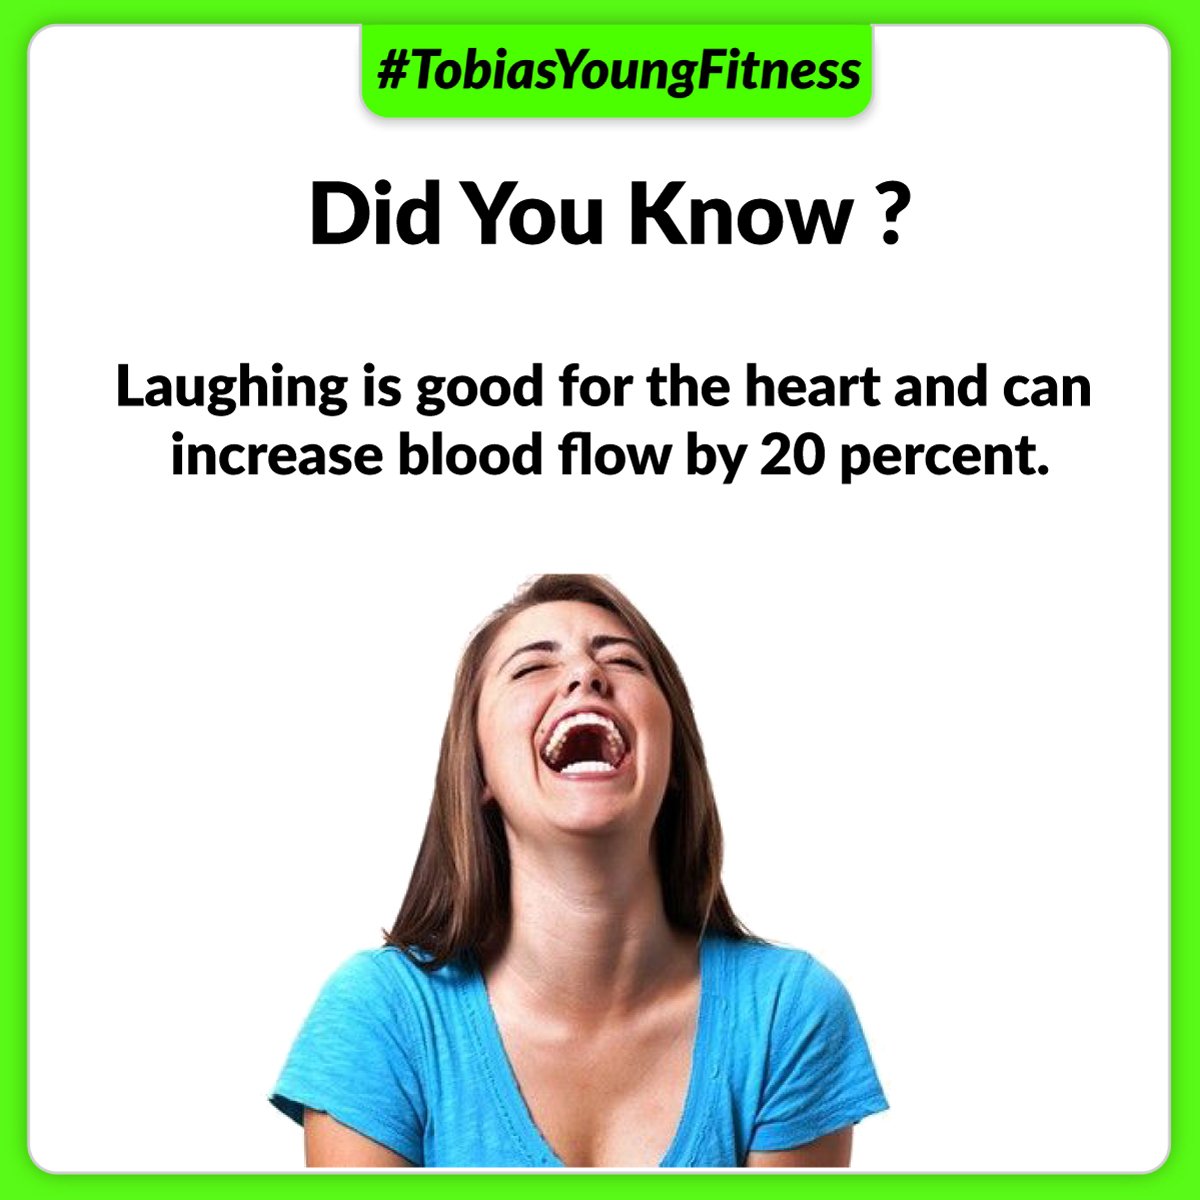 Stay healthy | Stay happy | Keep Laughing
.
.
.
.
#tobias #tobiasyoung #tobiasyoungfitness #fitnesstip #fitnesstipoftheday #tipsfitness #tuesdaymotivation #nutritions #nutritionfacts #nutritontip #healthyhabits #gymexercises #onlinefitnesscoach #coachincalifornia